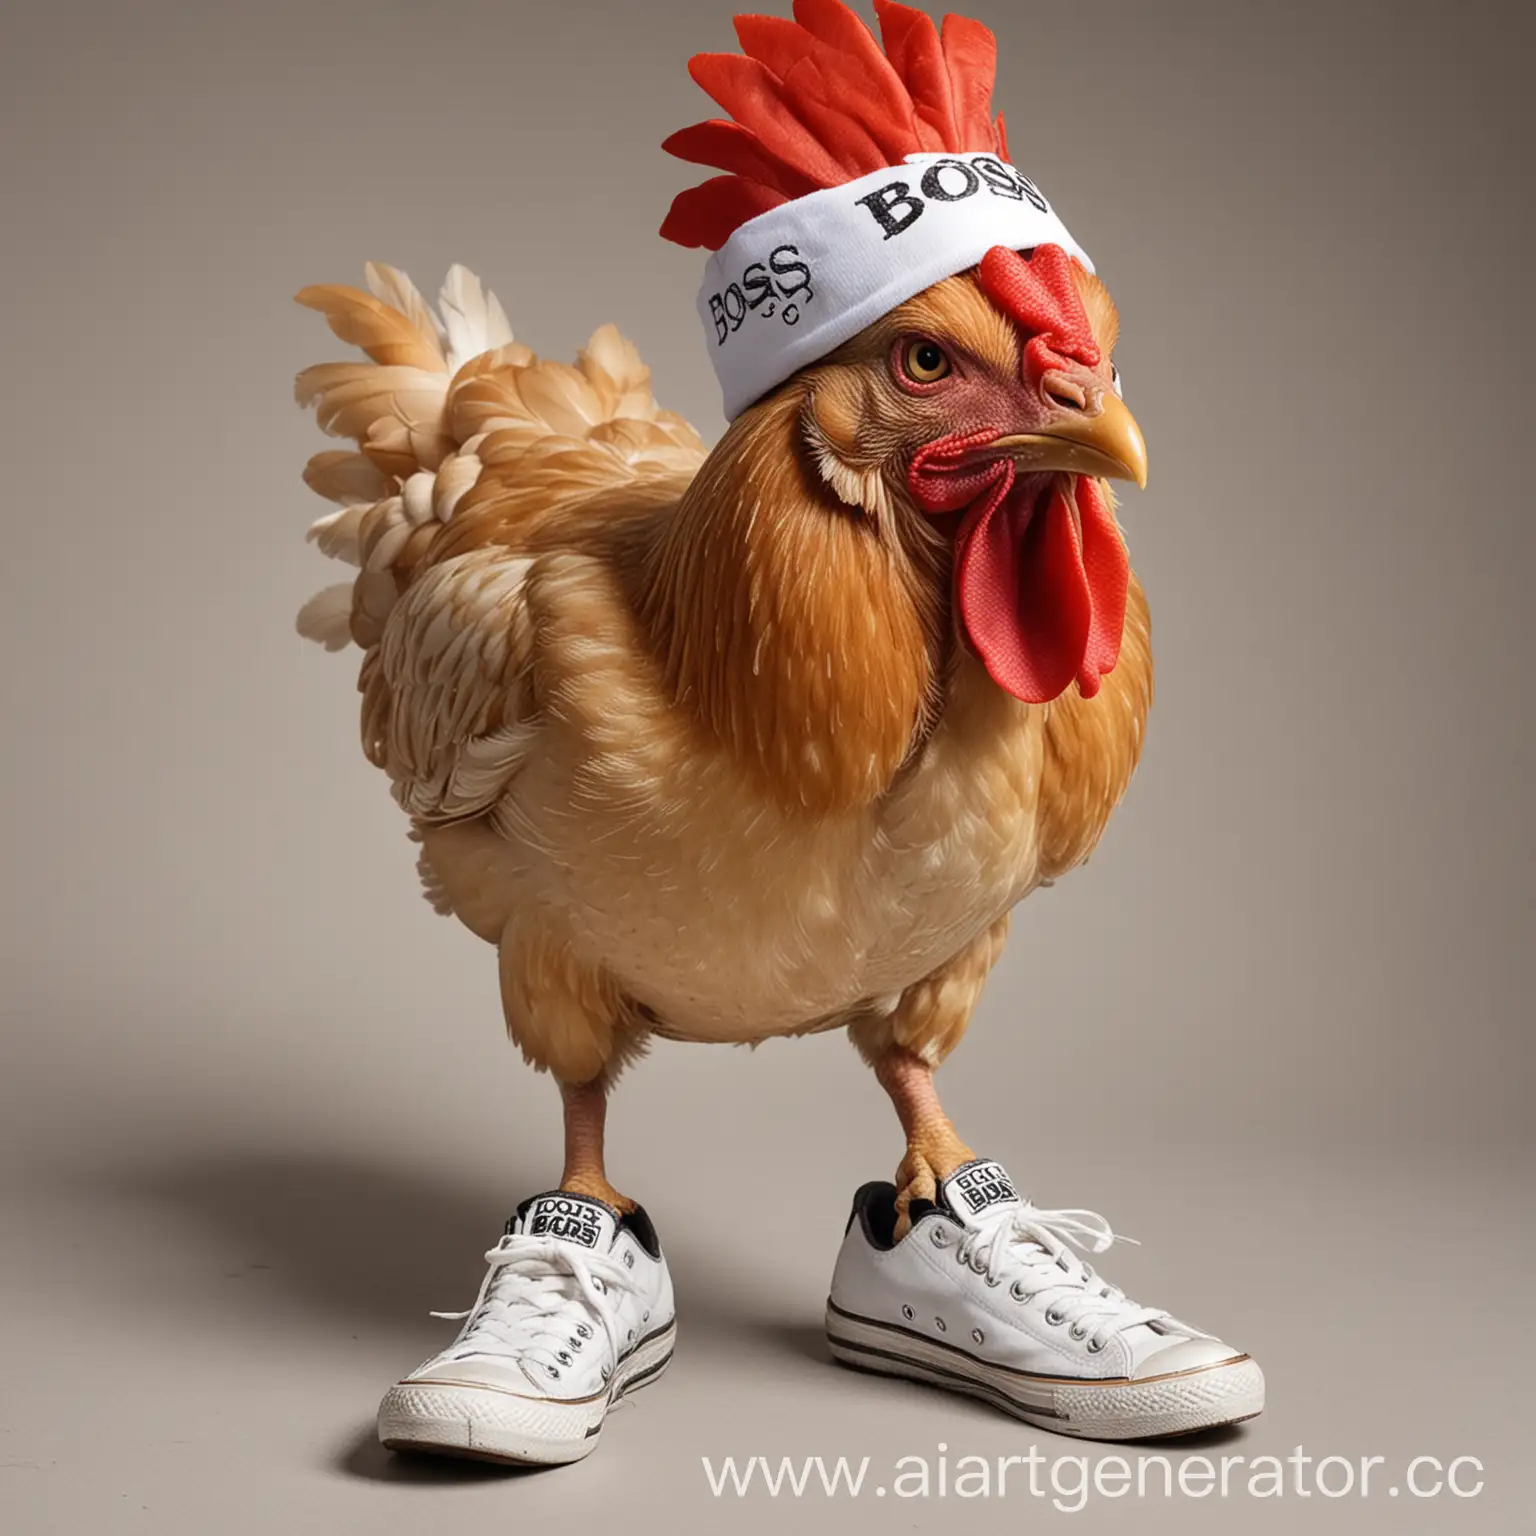 Boss-Chicken-Running-with-Sneakers-on-Forehead